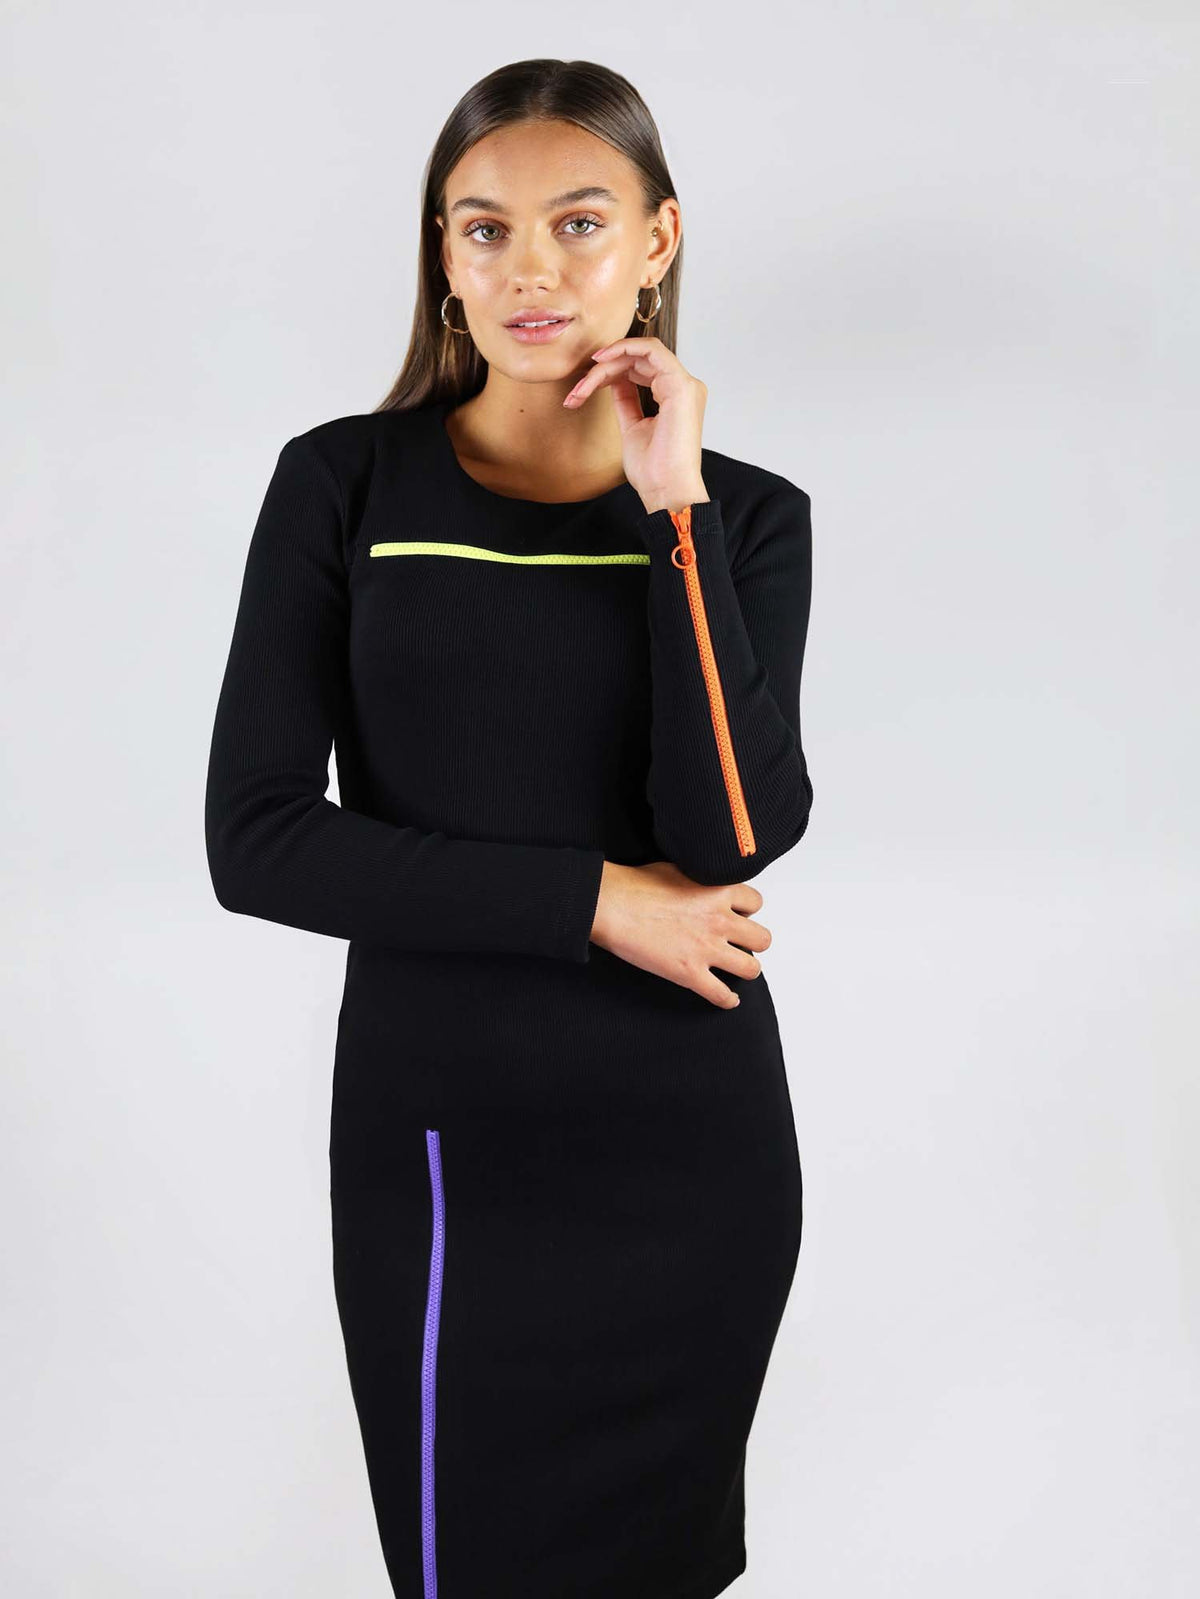 Plus Size Neon Green Midi Dress With Long Sleeves, Loose Fit